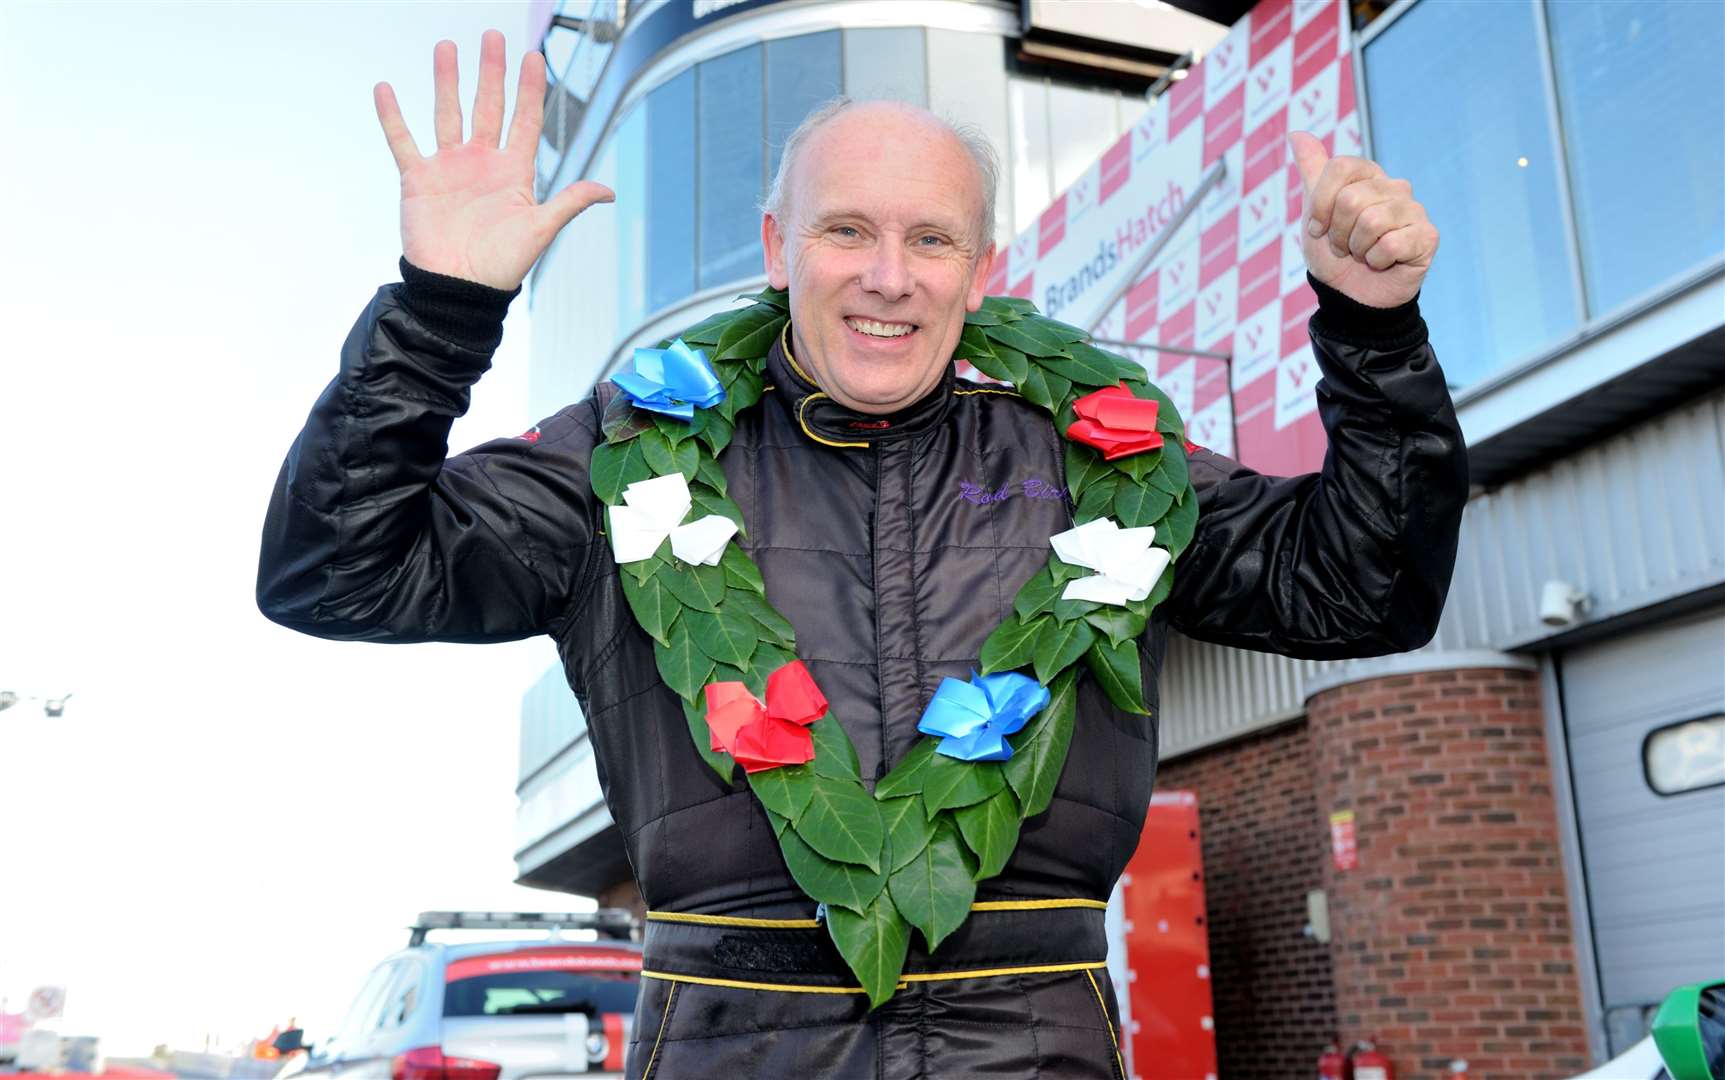 Birley broke Gerry Marshall’s record in 2017 by claiming his 626th win at Brands Hatch; he grabbed his 700th win at the same circuit on Sunday. All pictures: Simon Hildrew